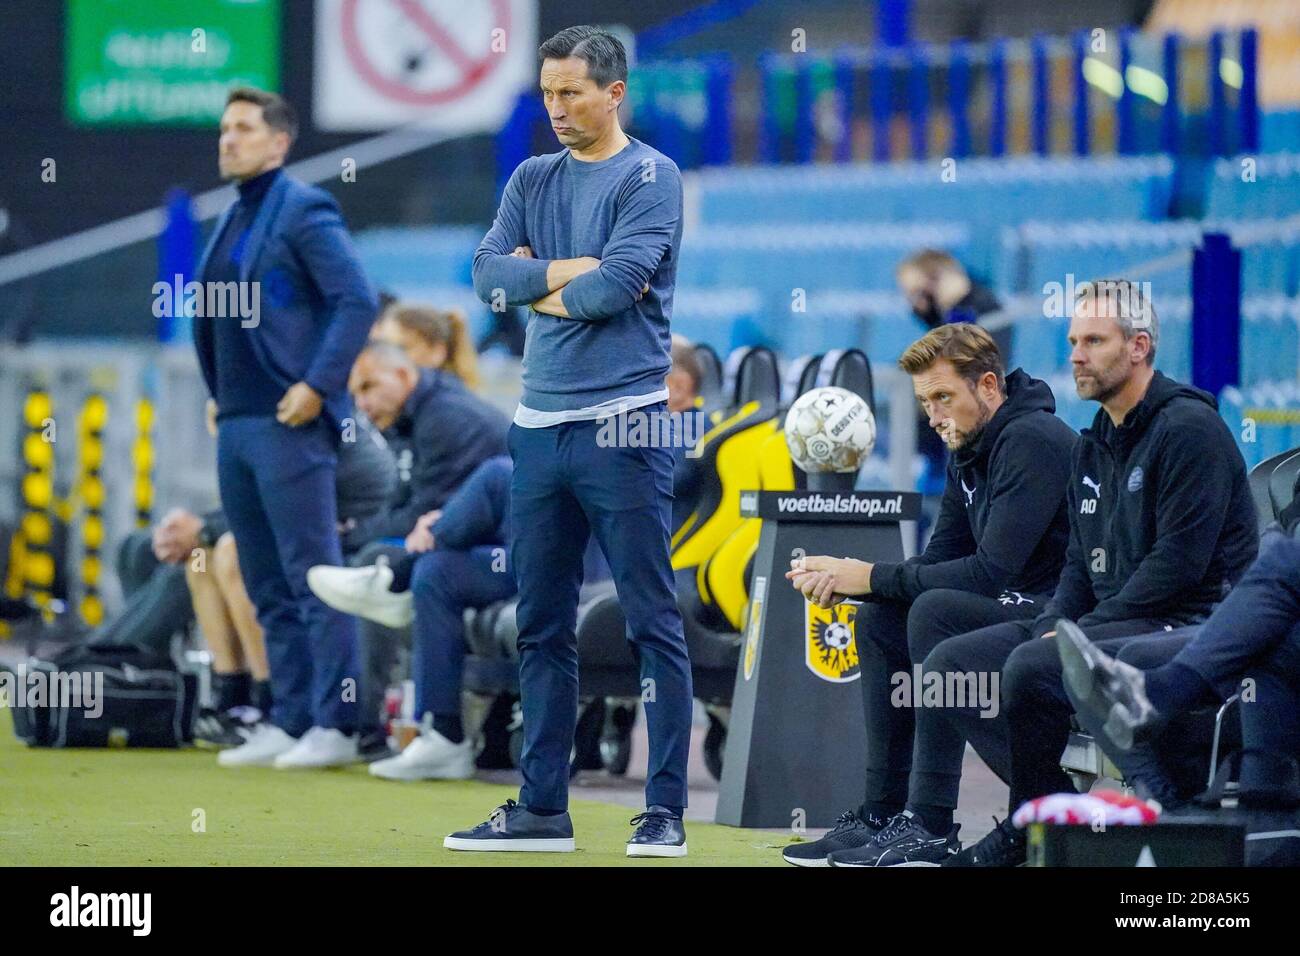 Roger Schmidt coach of PSV during the Netherlands championship Eredivisie football match between Vitesse and PSV on October 25, 2020 at Gelredome St C Stock Photo